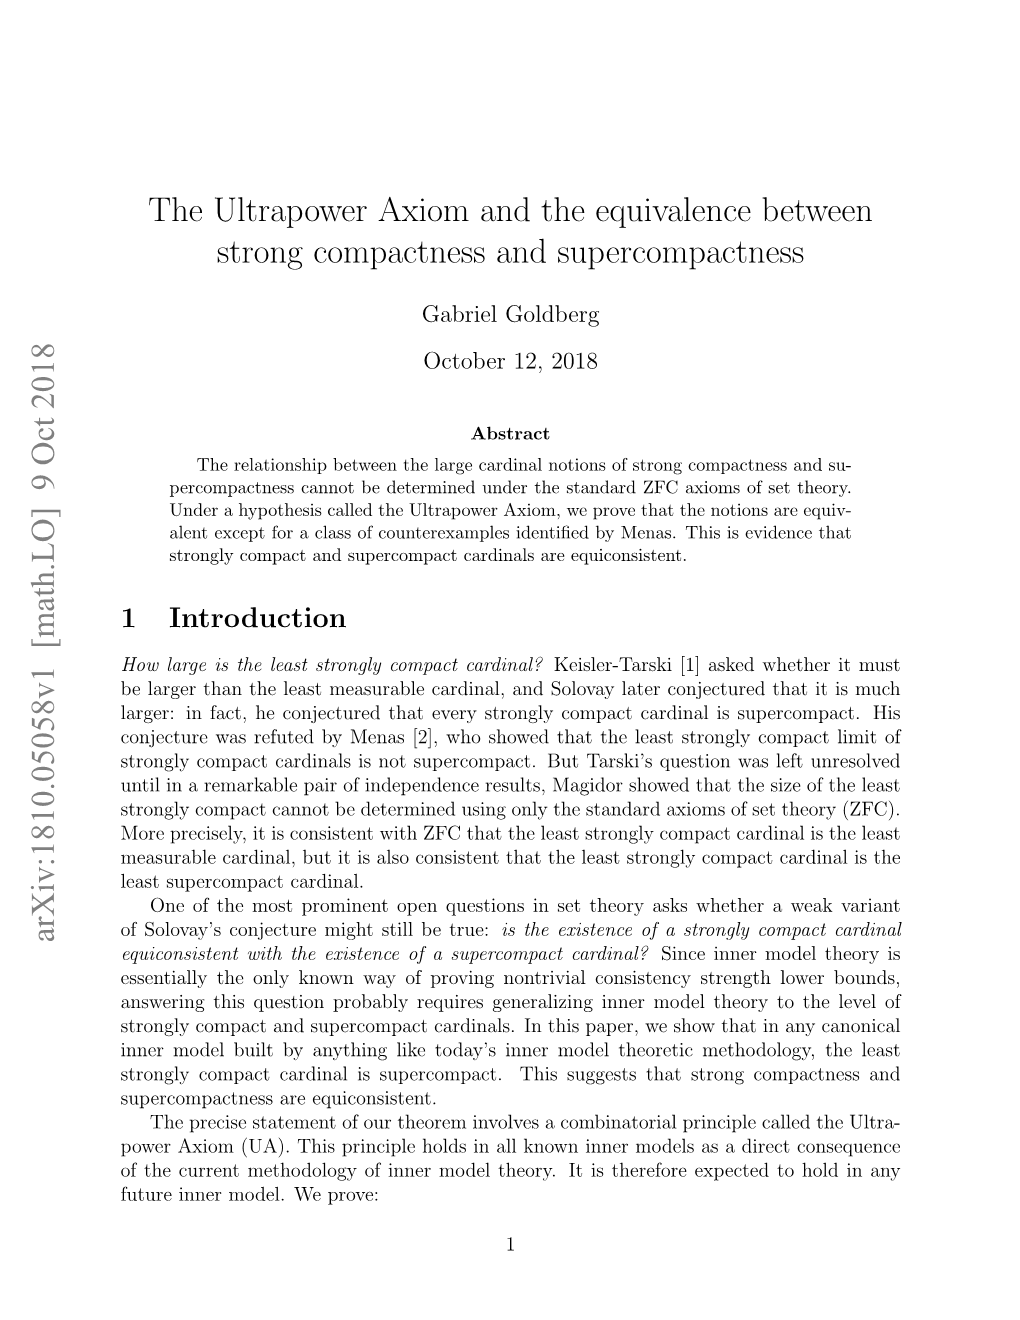 The Ultrapower Axiom and the Equivalence Between Strong Compactness and Supercompactness